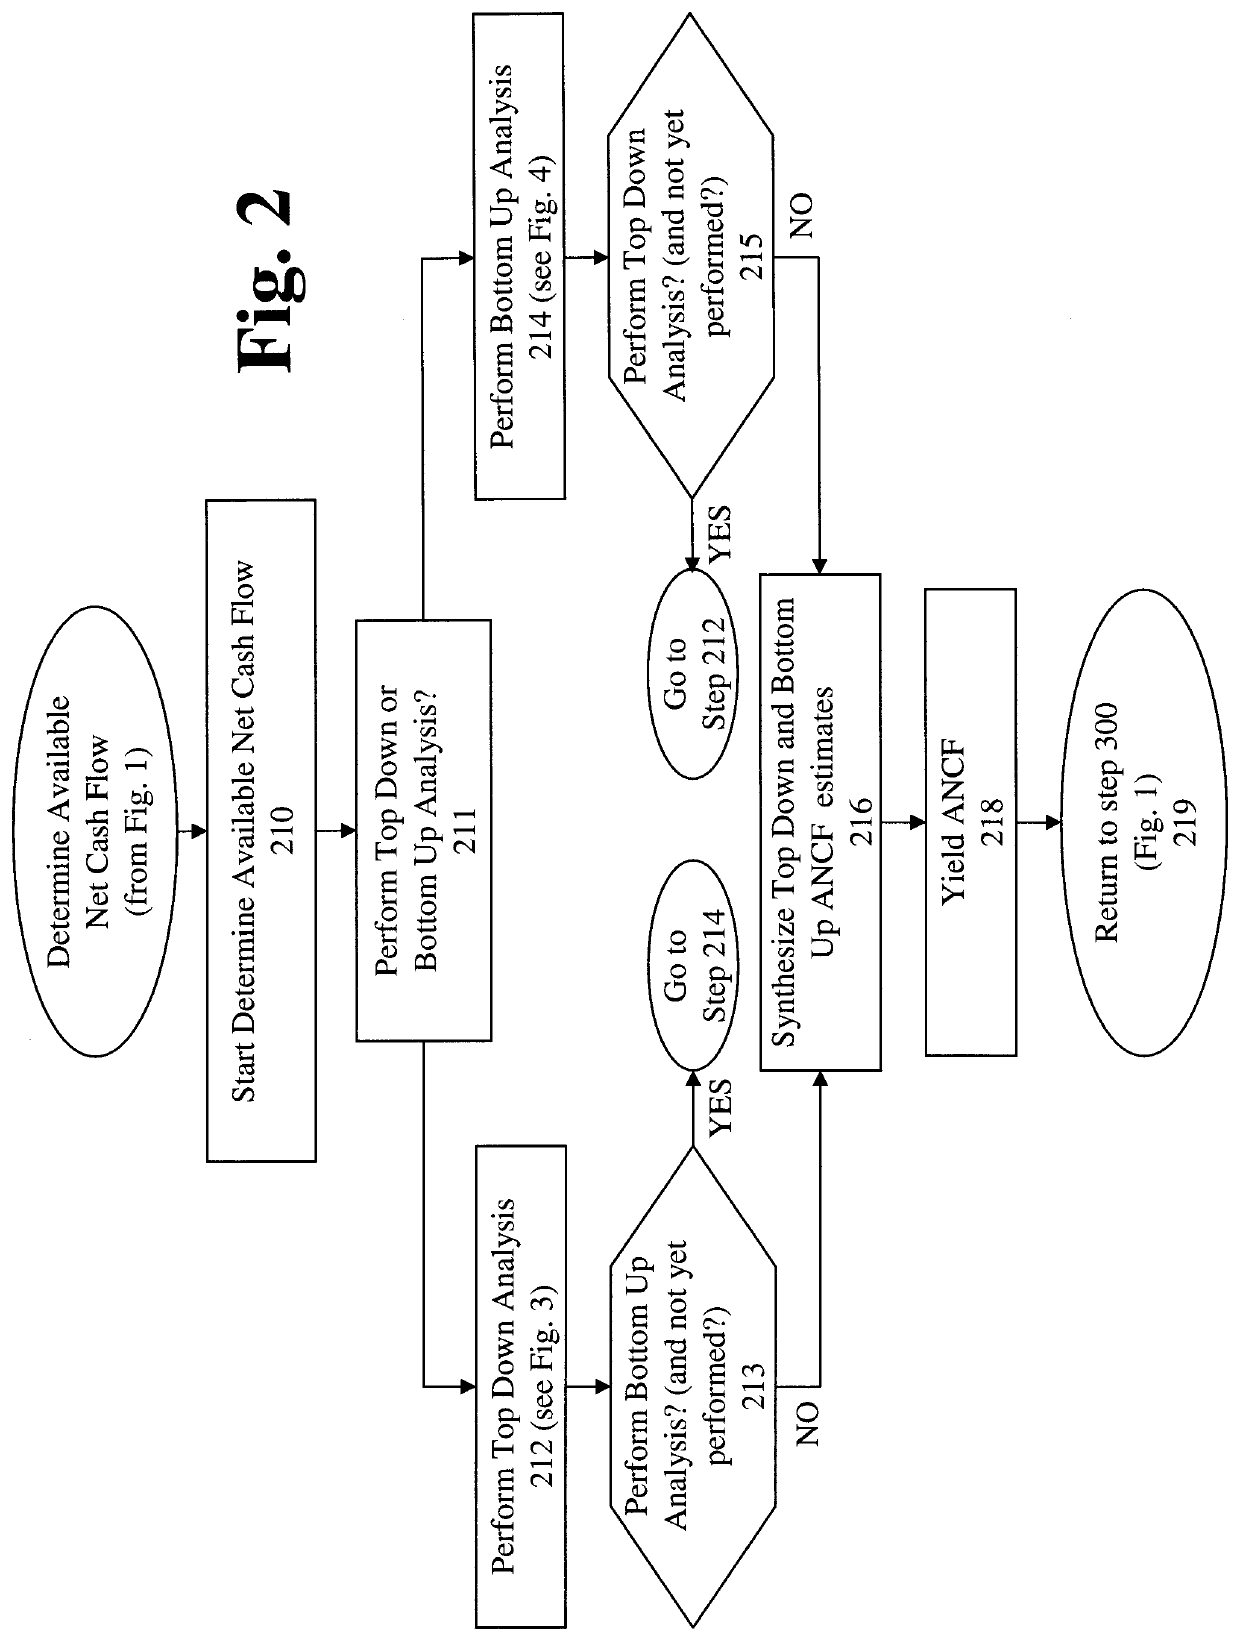 Systems and methods for identifying and capturing potential bankcard spending